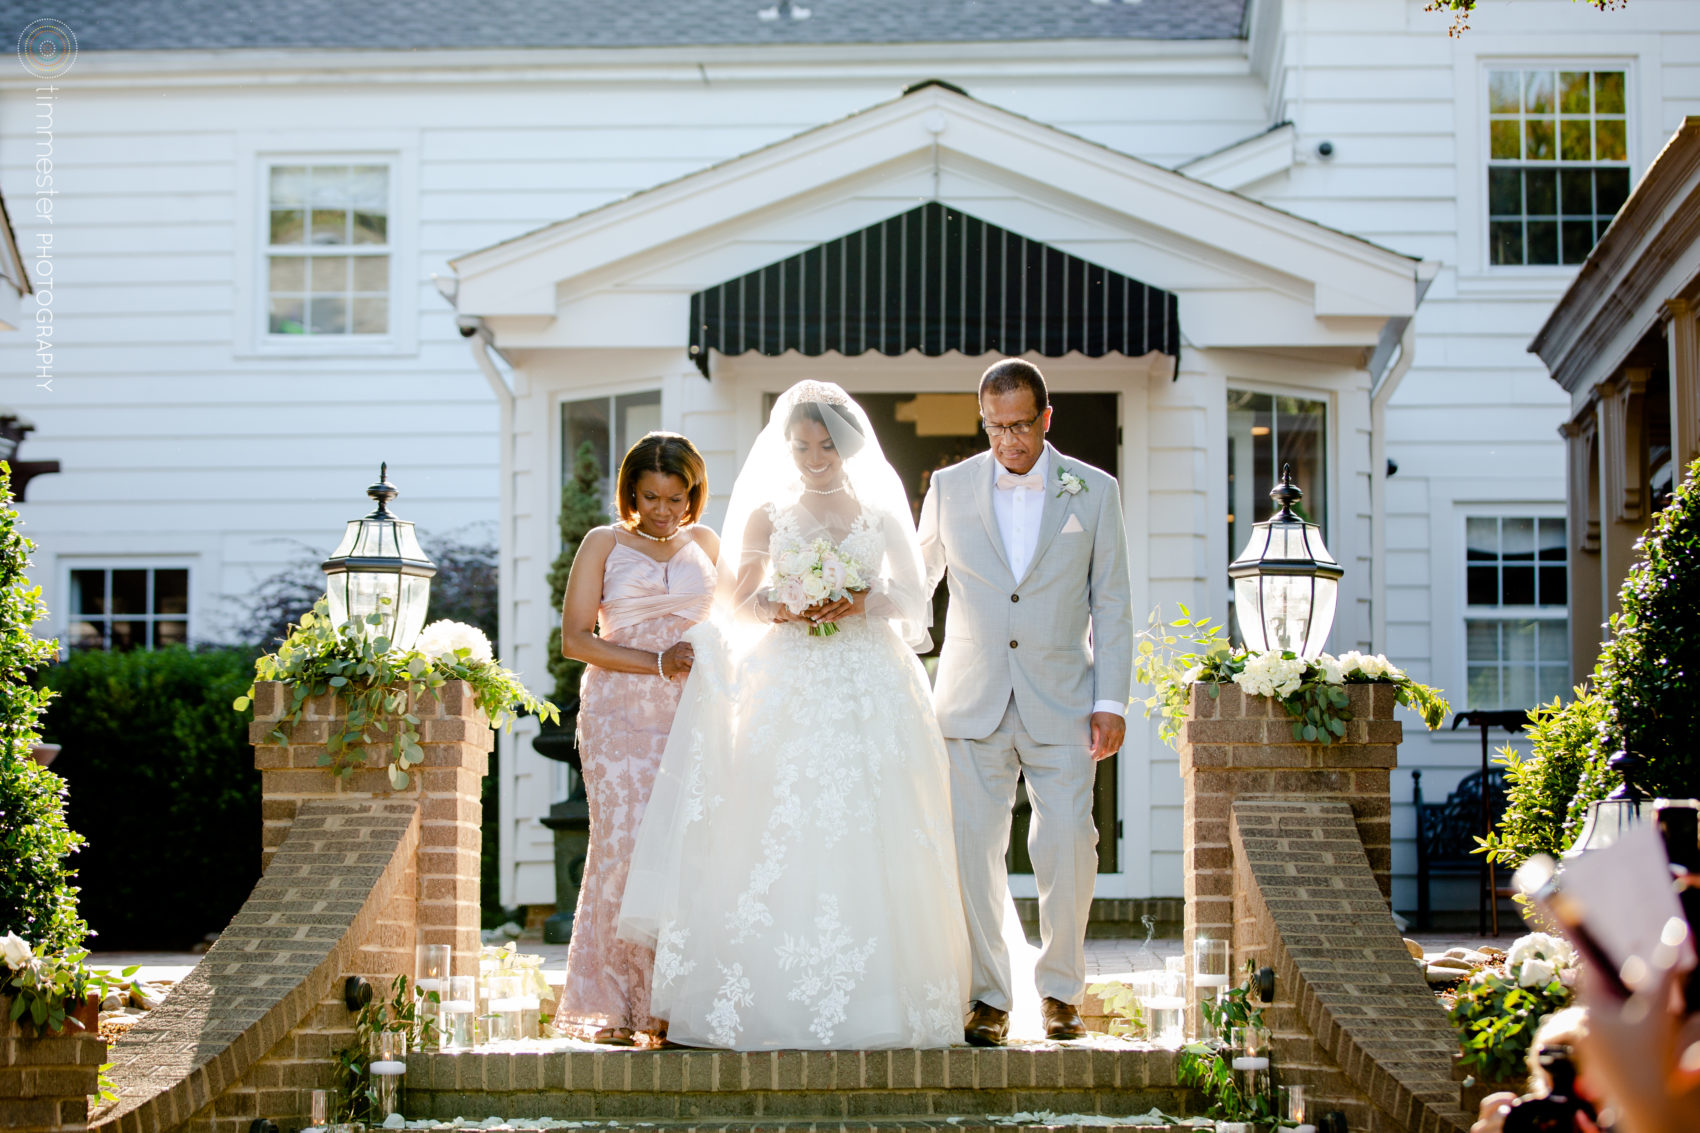 A Highgrove Estate wedding with an outdoor wedding ceremony.